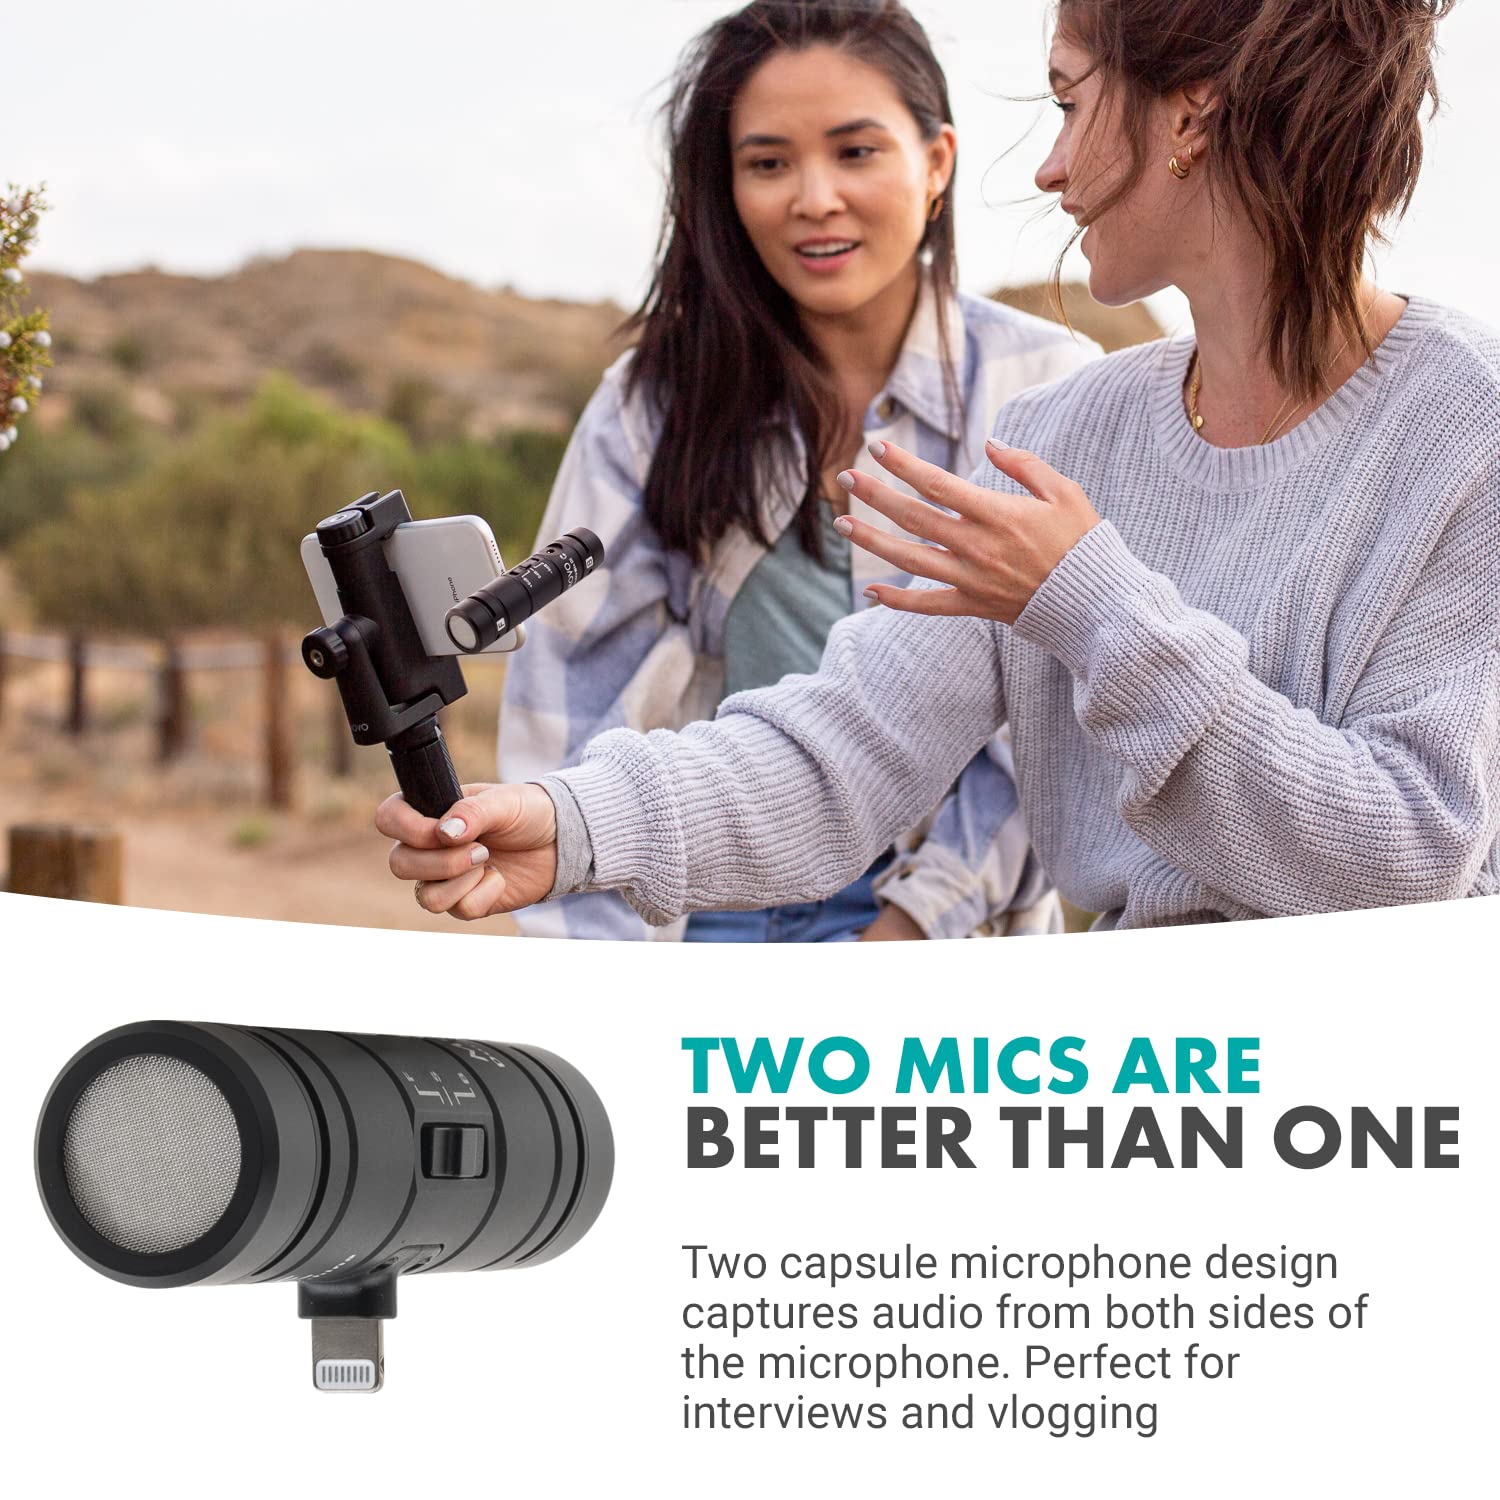 Movo DoubleMic-DI Dual Capsule Microphone for iPhone- Two-Sided Cardioid Condenser iPhone Microphone for Video Recording- Professional Microphone for iPhone, iPad, iOS- Apple Lightning MFi Certified  - Good